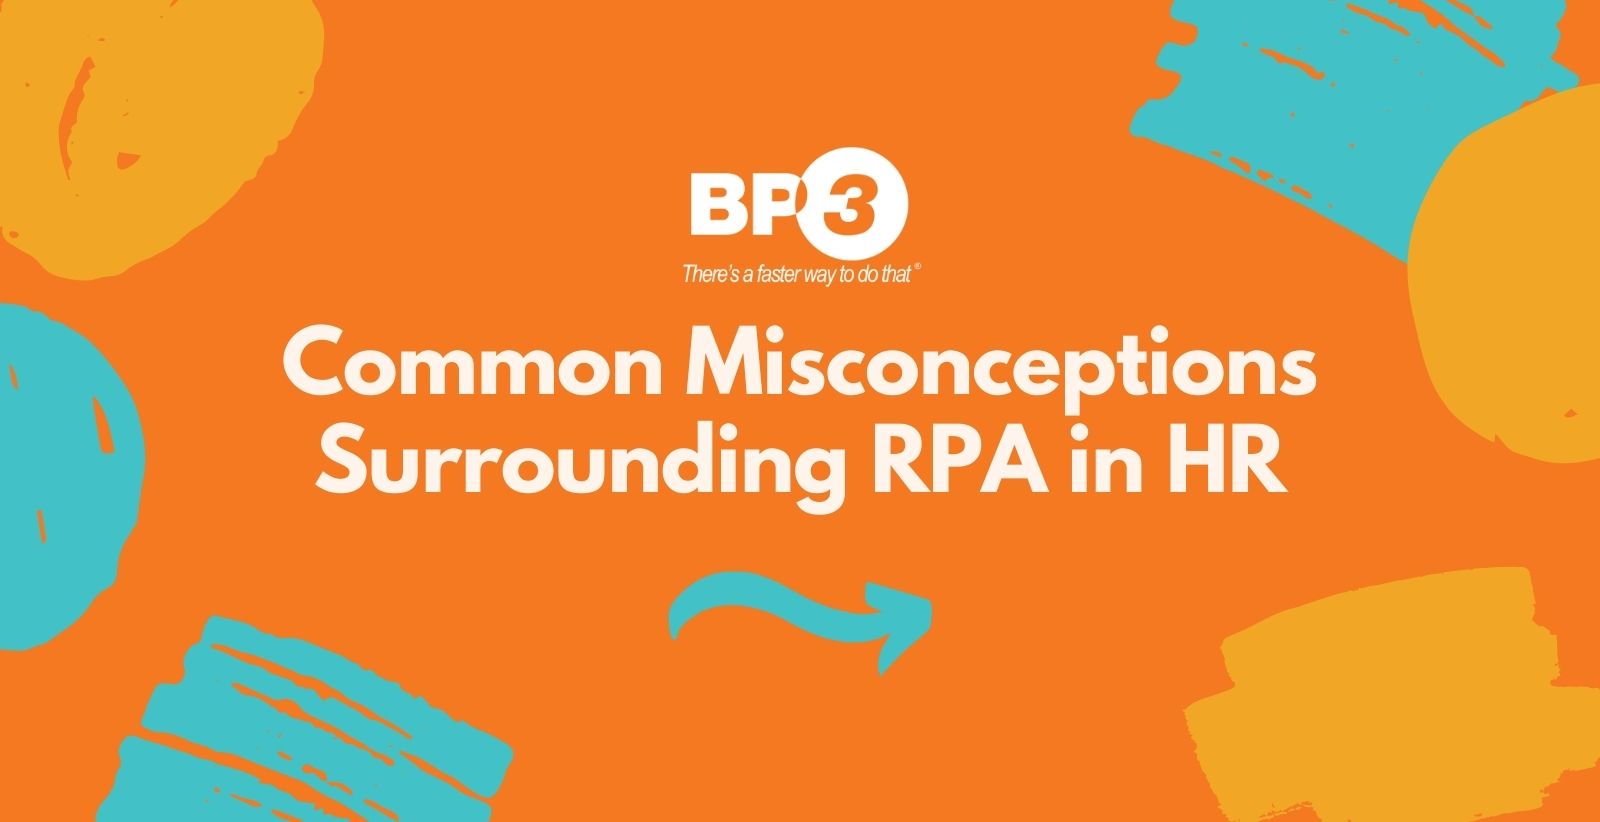 Common misconceptions surrounding RPA in HR